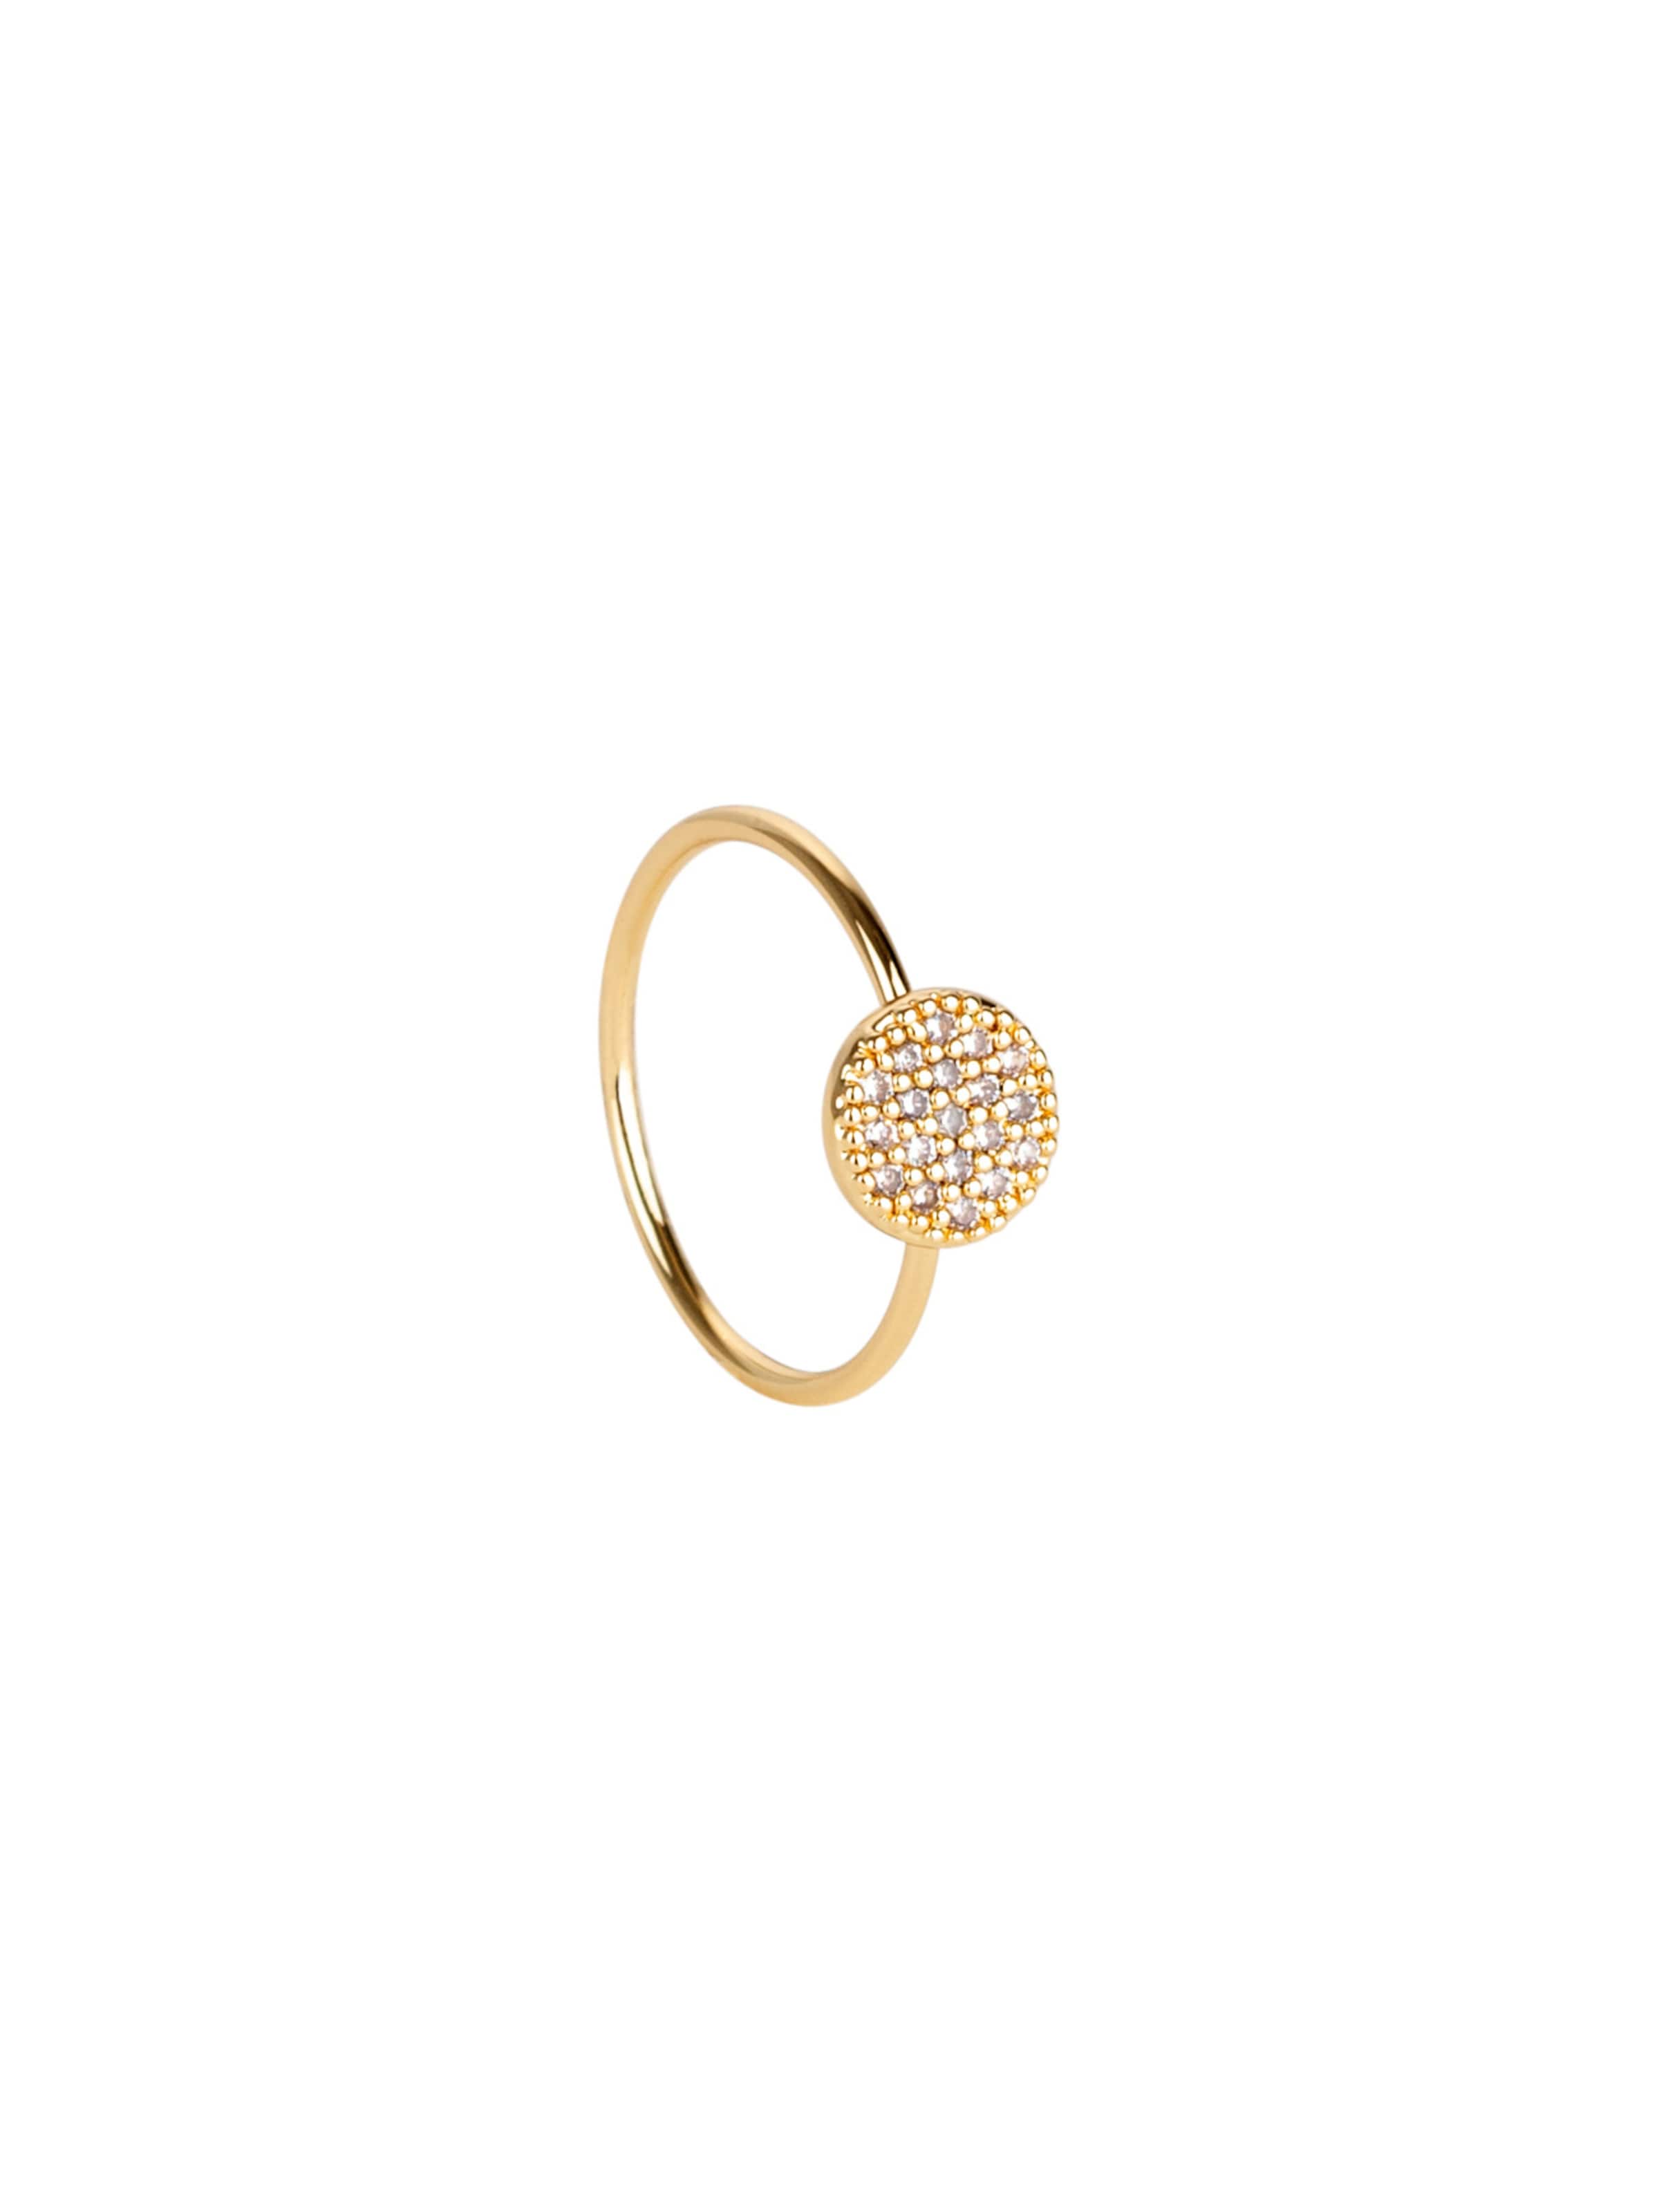 TOSH Ring in Gold 